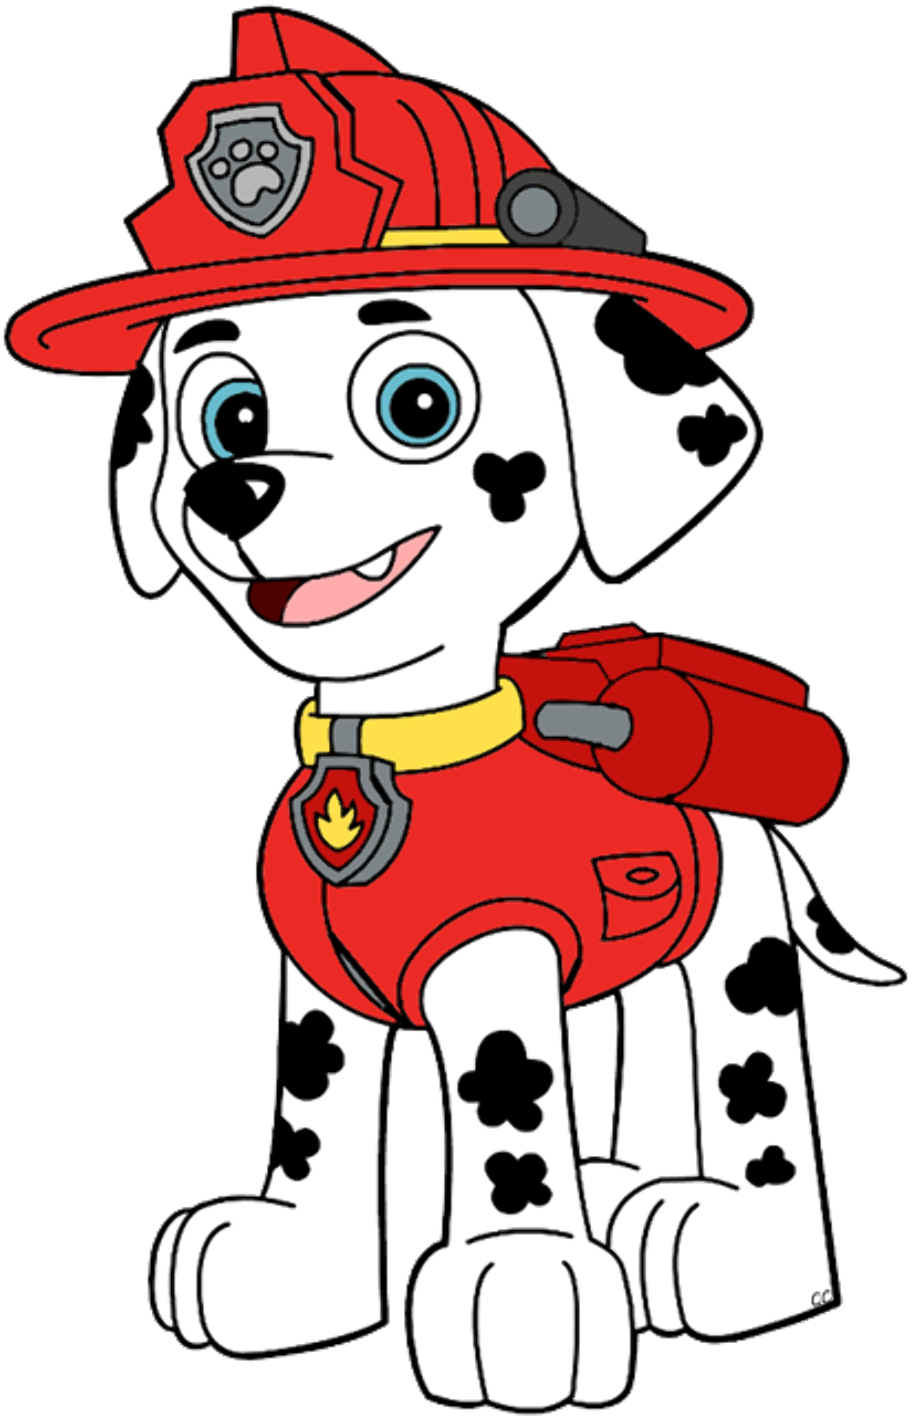 Download High Quality paw patrol clipart cartoon Transparent PNG Images